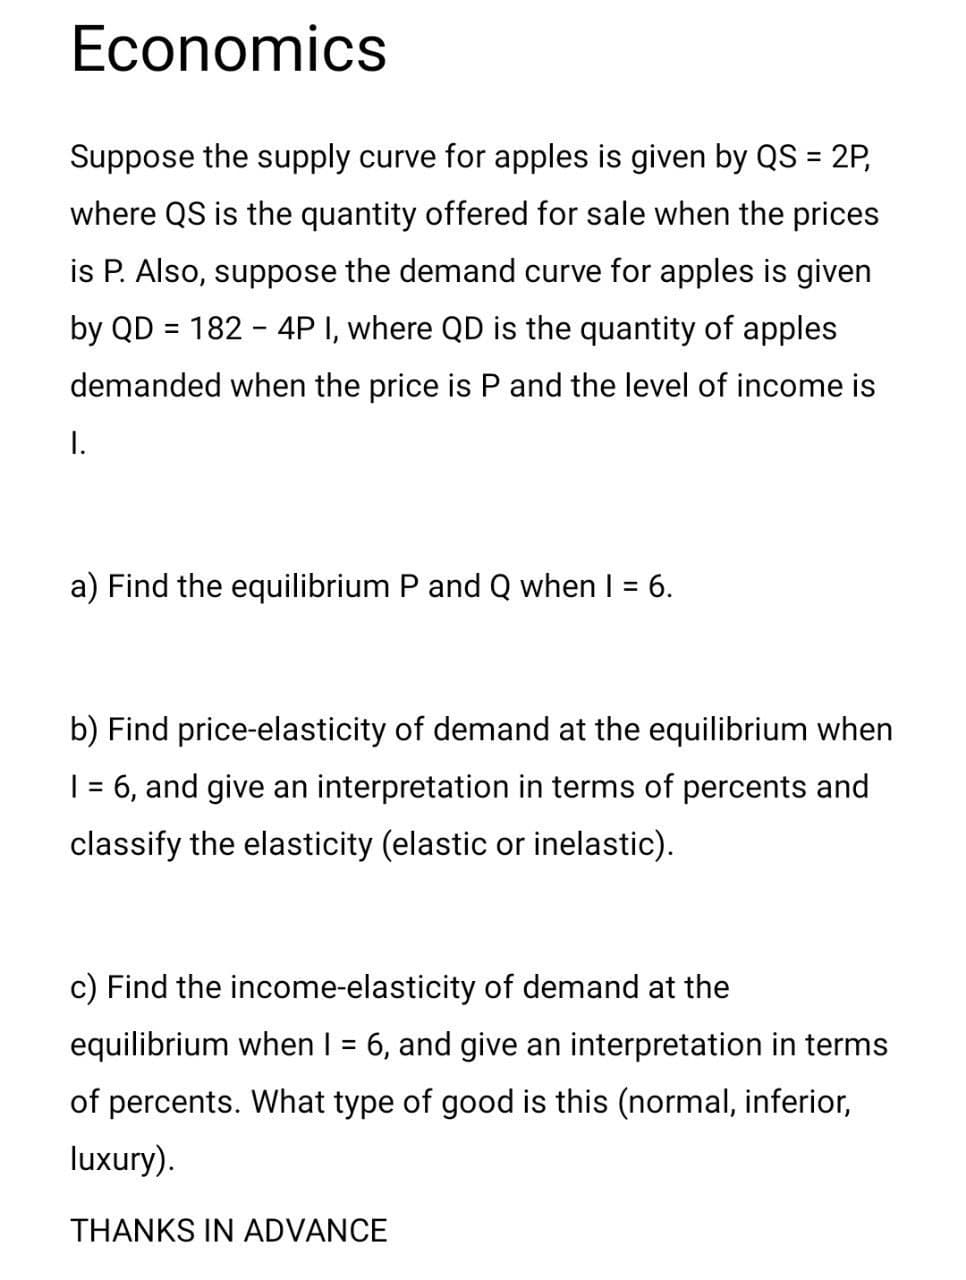 Economics
Suppose the supply curve for apples is given by QS = 2P,
%3D
where QS is the quantity offered for sale when the prices
is P. Also, suppose the demand curve for apples is given
by QD = 182 - 4P I, where QD is the quantity of apples
demanded when the price is P and the level of income is
I.
a) Find the equilibrium P and Q when I = 6.
%3D
b) Find price-elasticity of demand at the equilibrium when
| = 6, and give an interpretation in terms of percents and
classify the elasticity (elastic or inelastic).
c) Find the income-elasticity of demand at the
equilibrium when I = 6, and give an interpretation in terms
of percents. What type of good is this (normal, inferior,
luxury).
THANKS IN ADVANCE
